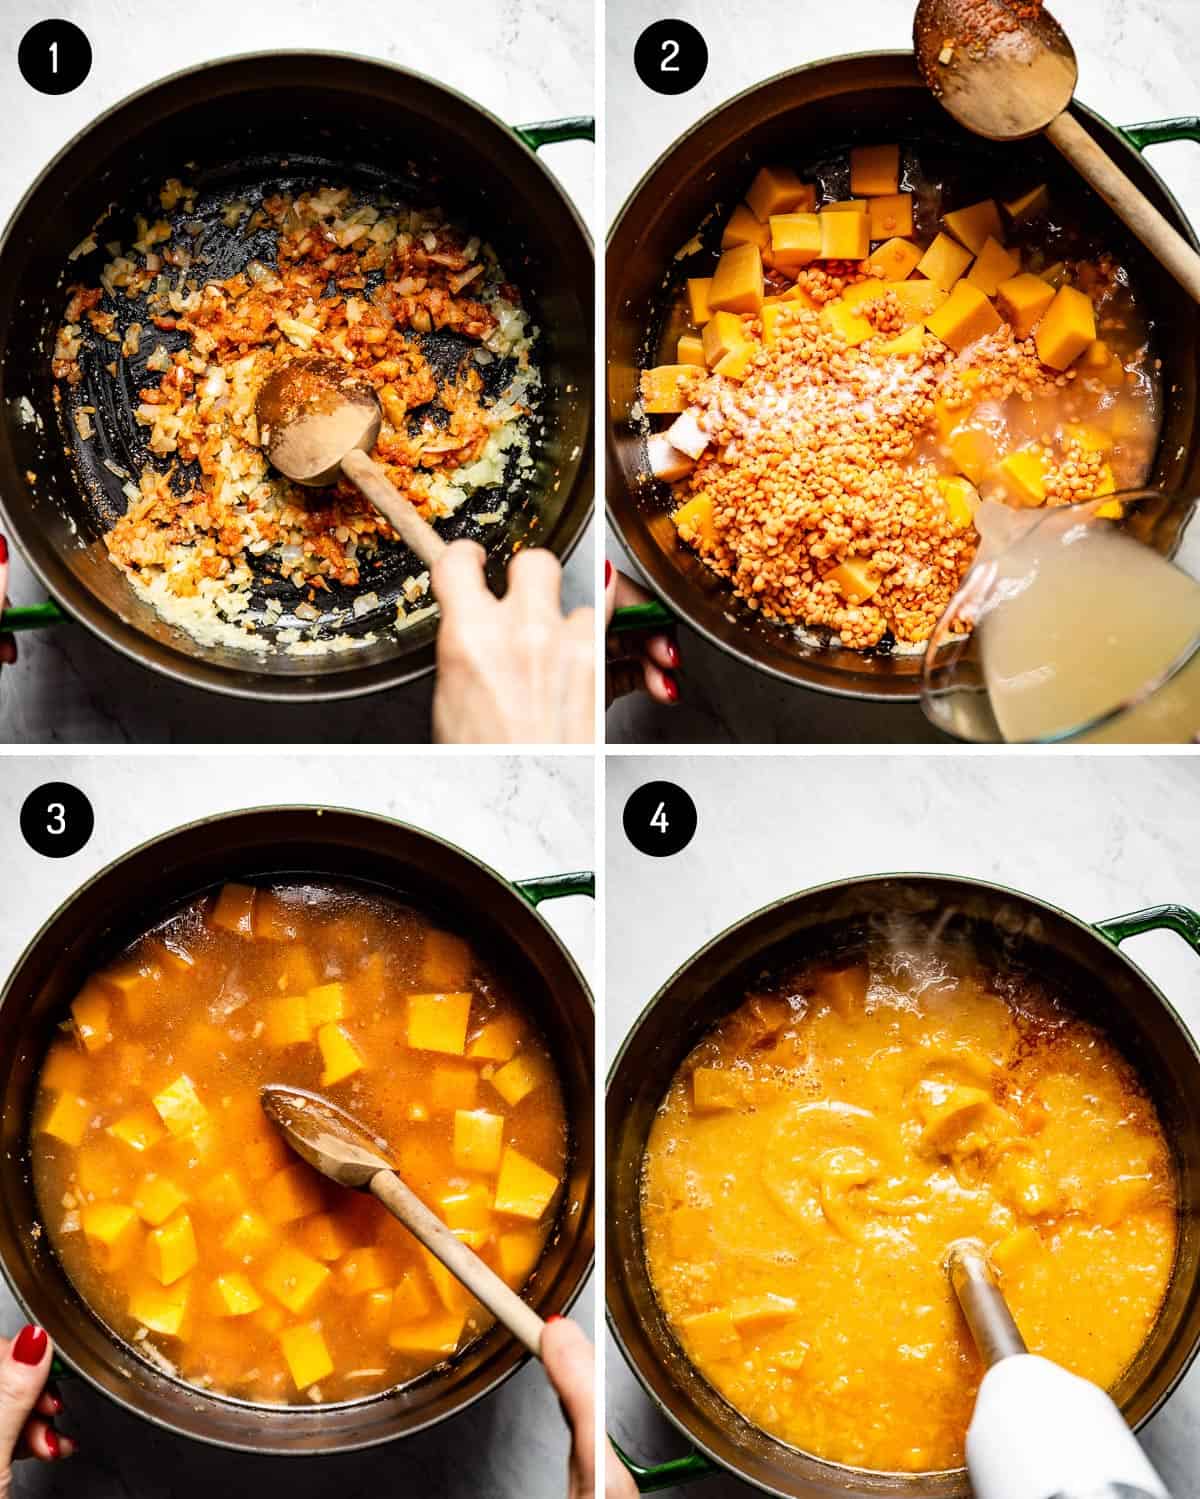 How to make butternut squash curry shown in 4 images